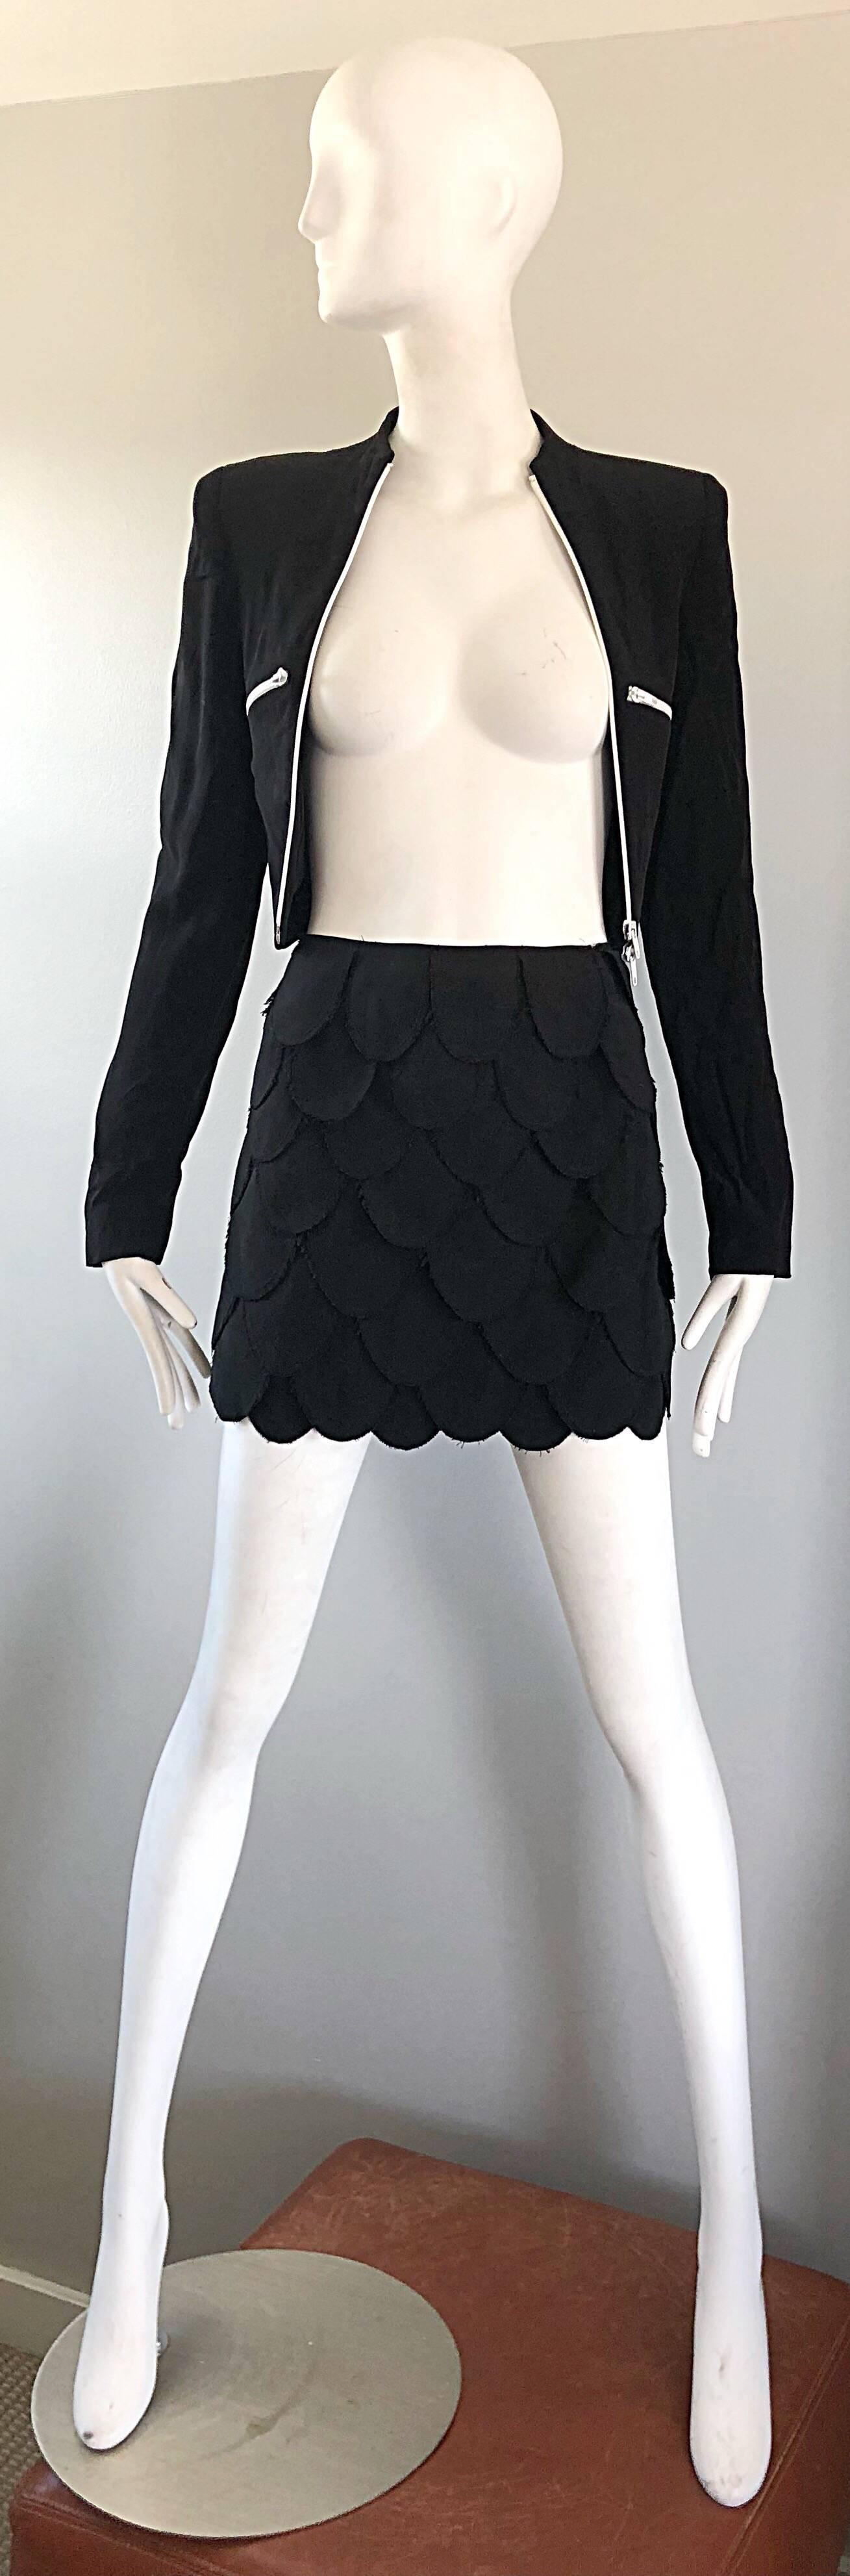 Moschino Cheap & Chic Vintage 90s Black Size 4 Carwash Fringe Mini Skirt For Sale 5